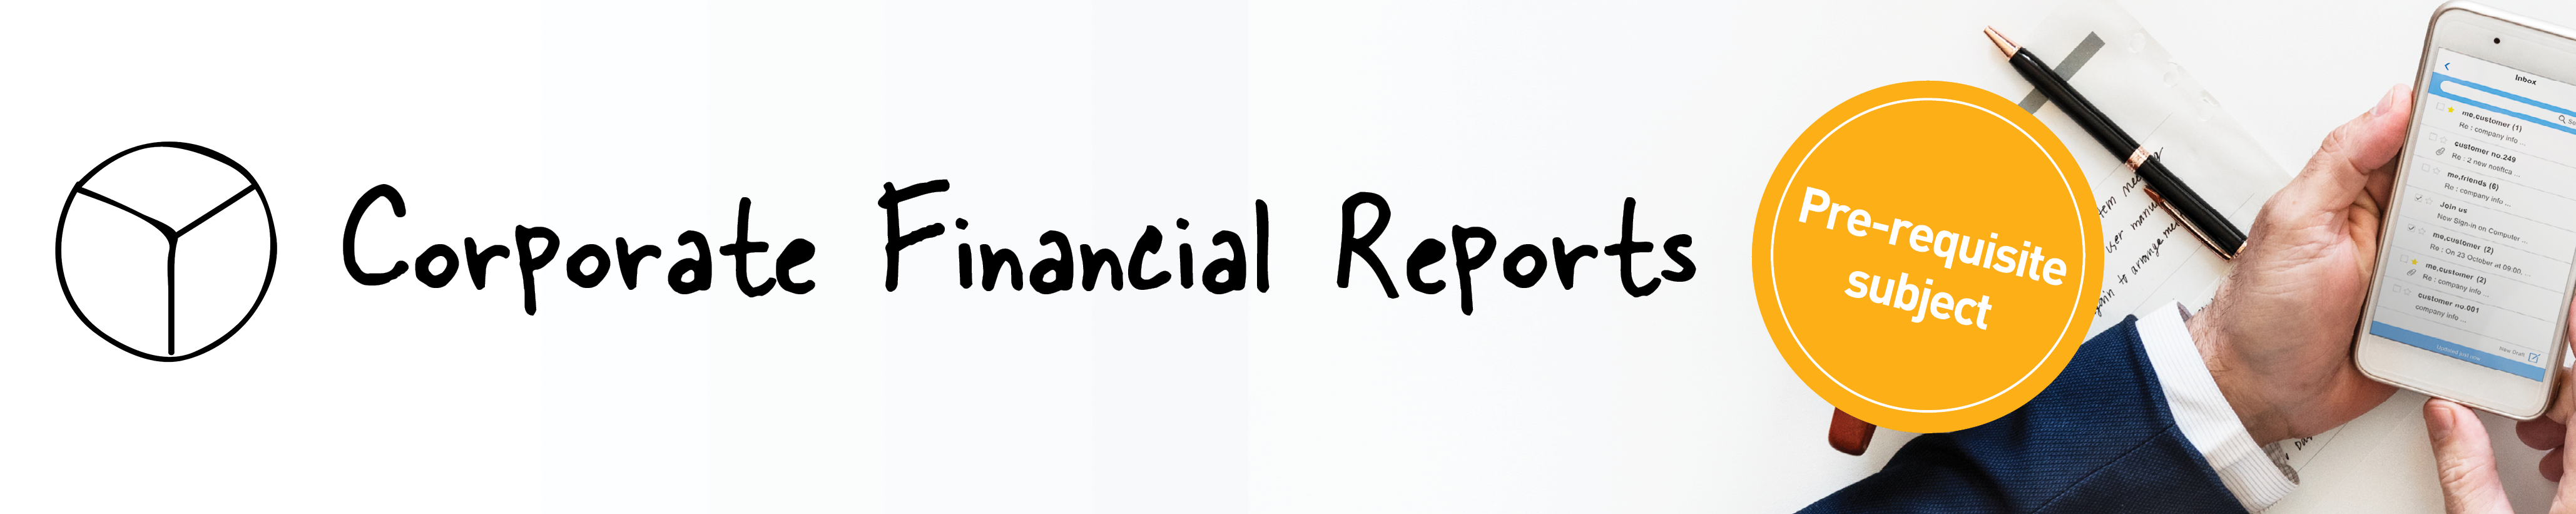 Corporate Financial Reports